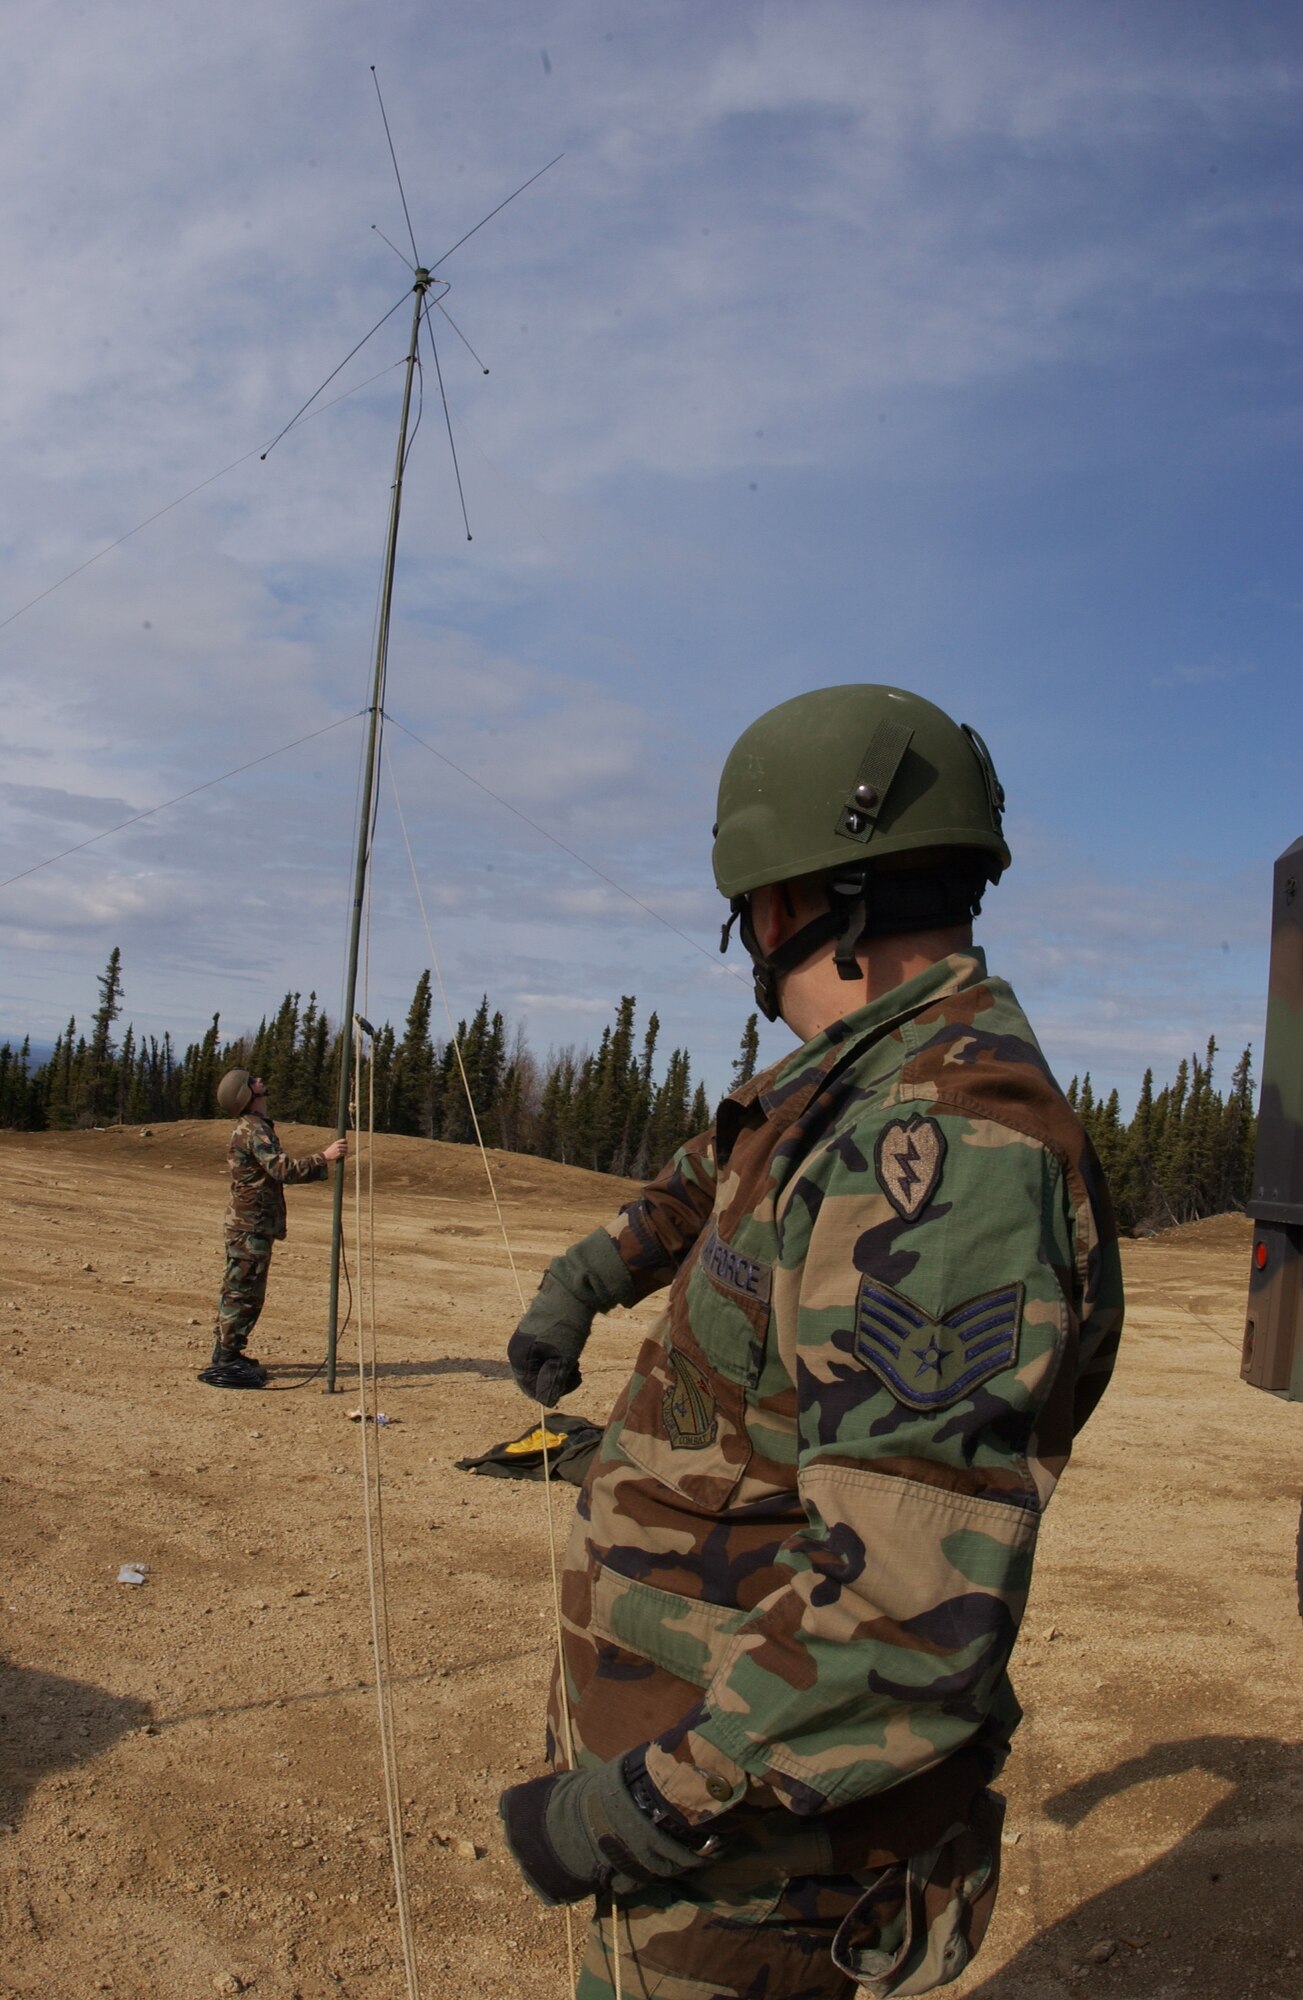 EIELSON AIR FORCE BASE, Alaska -- Staff Sgt. Richard Gustafson(Front) and Senior Airman Robert Olson(Back), 3rd Air Support Operations Squadron, erect an OE-254 FM Radio Antenna to enable communication with Army personnel May 15 during Operation URSA Minor. ASOS members completed day one of a three-day field training exercise designed to prepare Airman with hands on combat training and experience before deploying to a combat area. (U.S. Air Force Photo by Airman 1st Class Jonathan Snyder) 